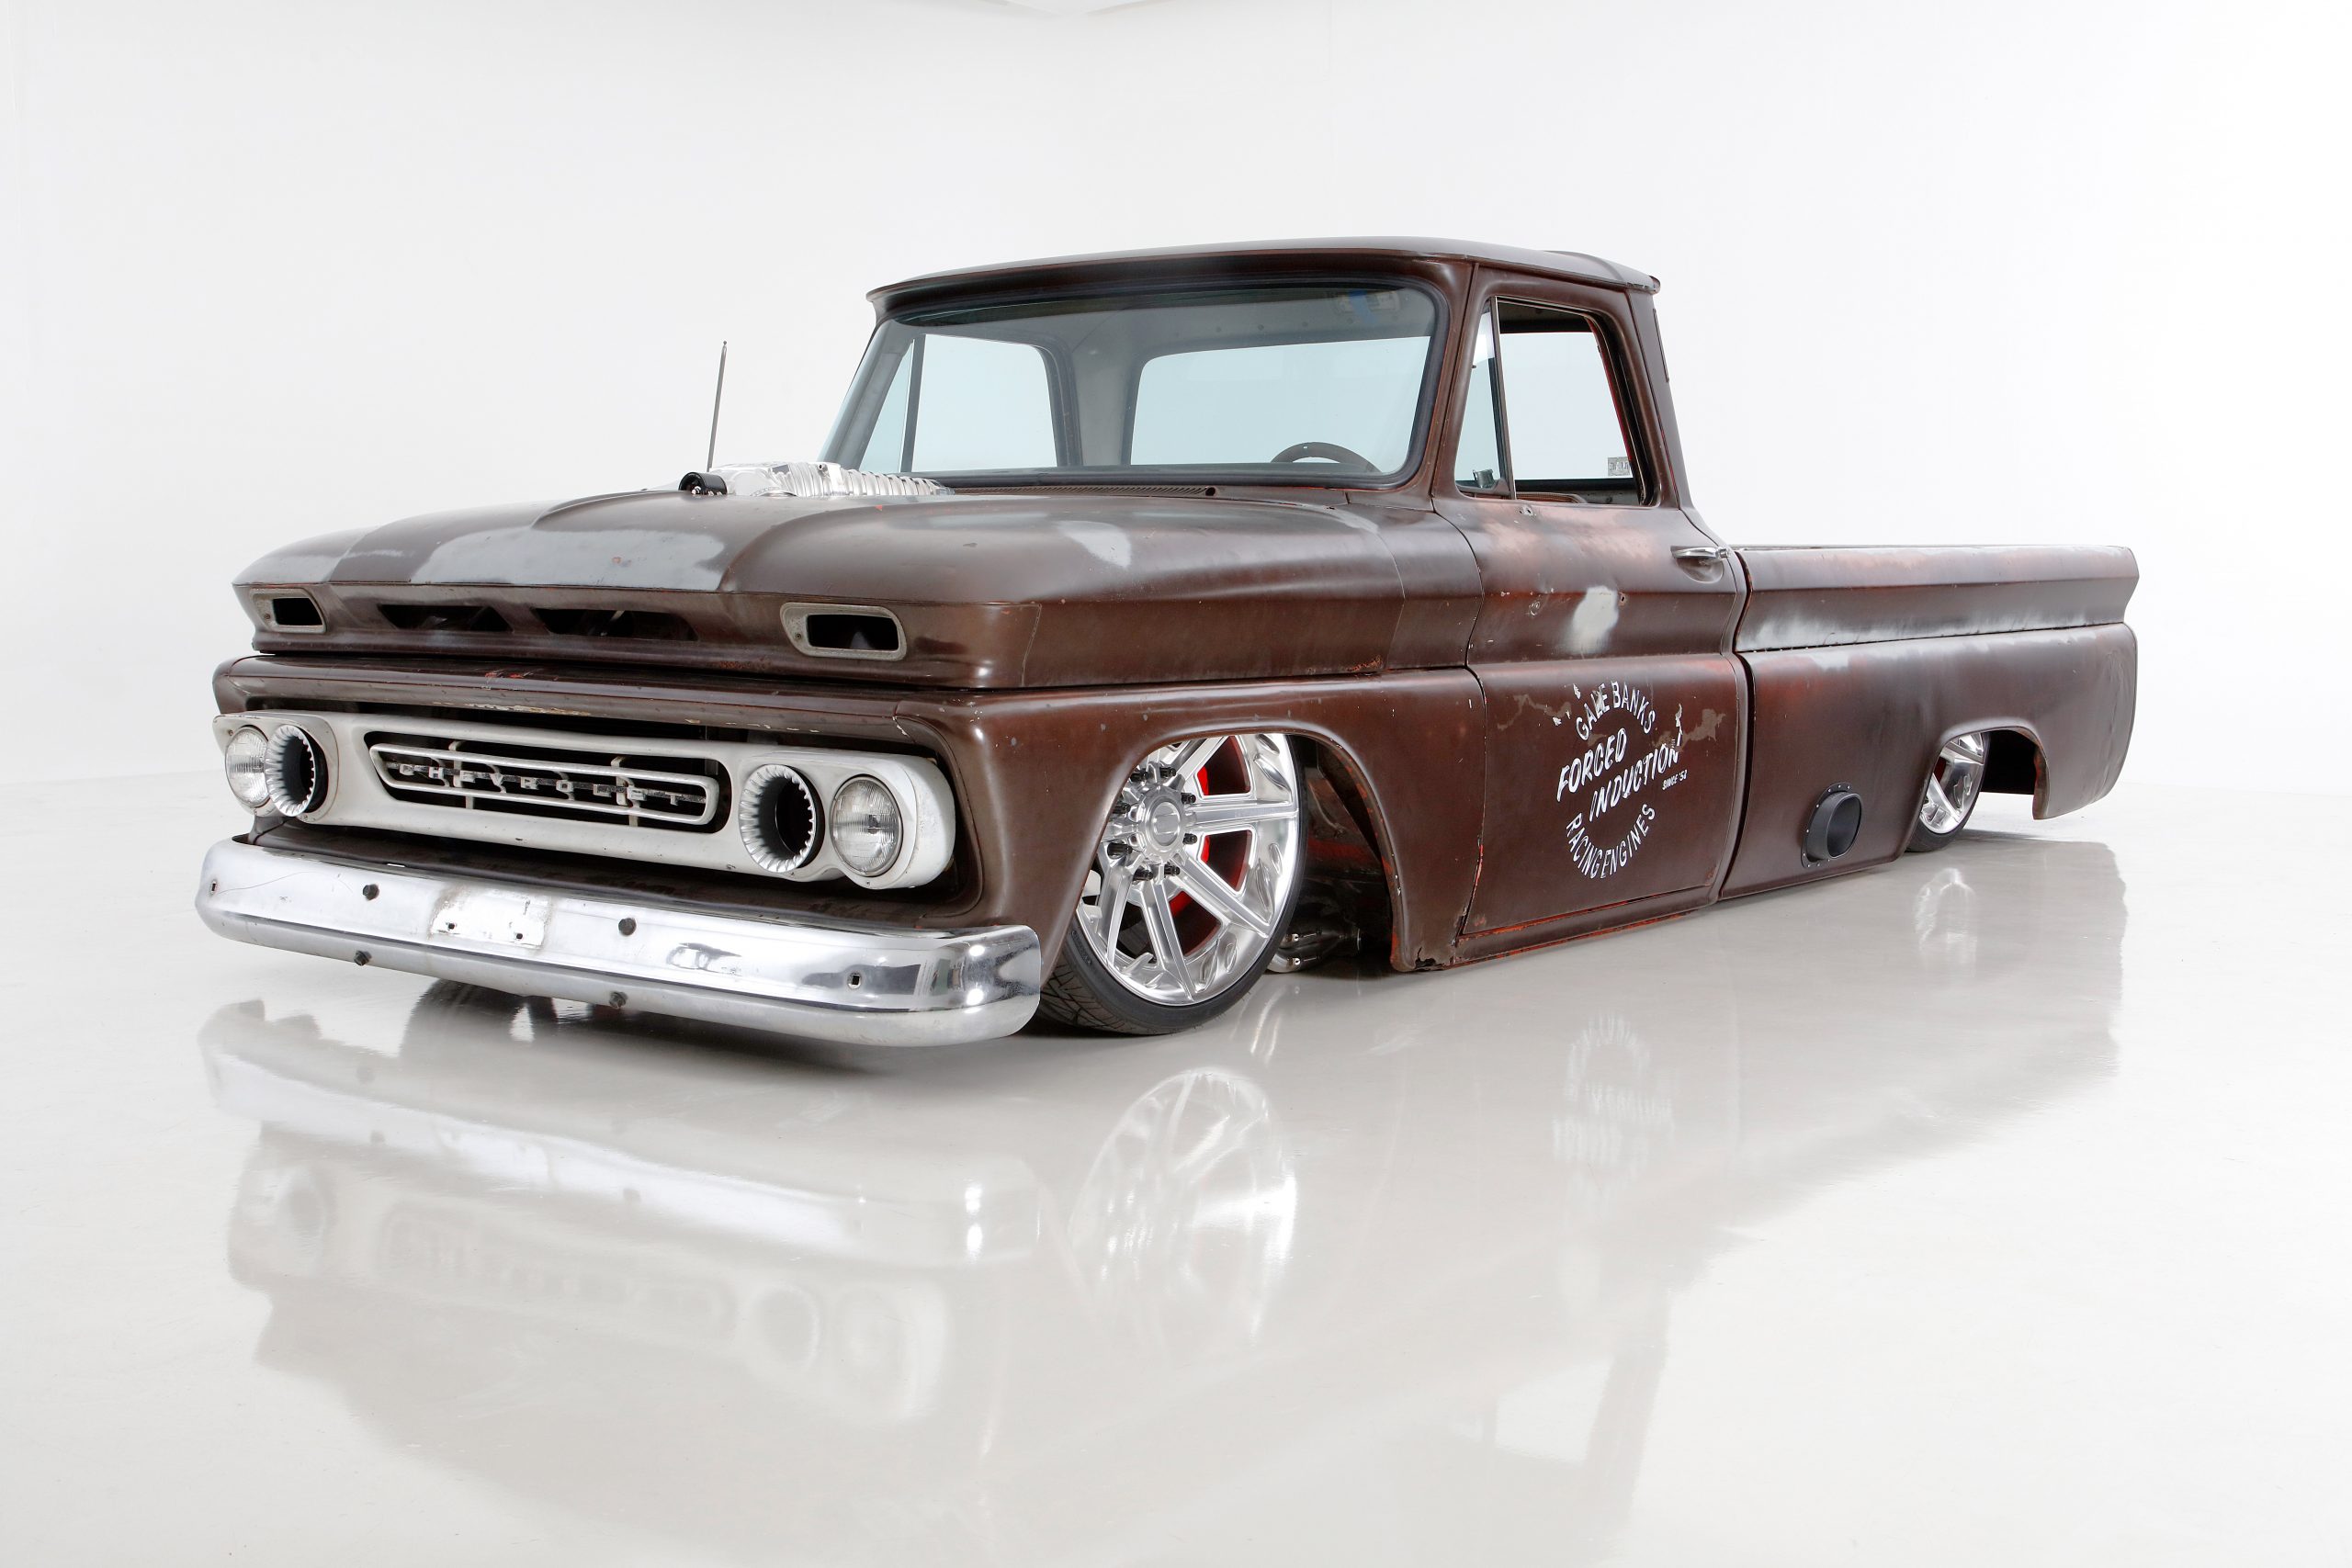 Banks Power Showcases Crate Engine Program with ’66 Chevy Truck RestoMod | THE SHOP